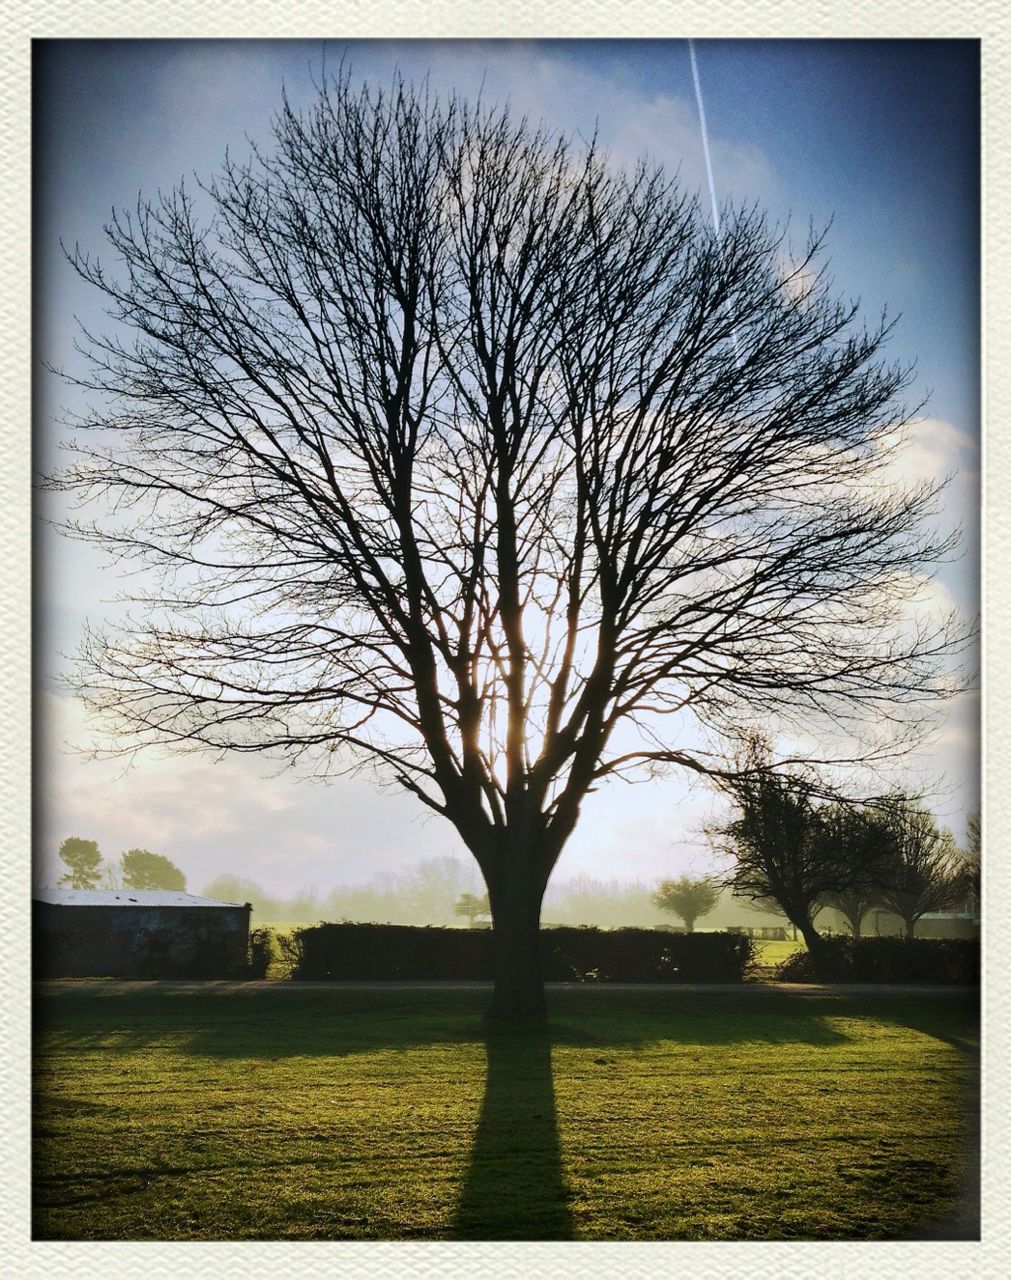 tree, bare tree, grass, field, transfer print, branch, tranquil scene, tranquility, sky, landscape, auto post production filter, beauty in nature, nature, scenics, grassy, park - man made space, growth, sunlight, tree trunk, lawn